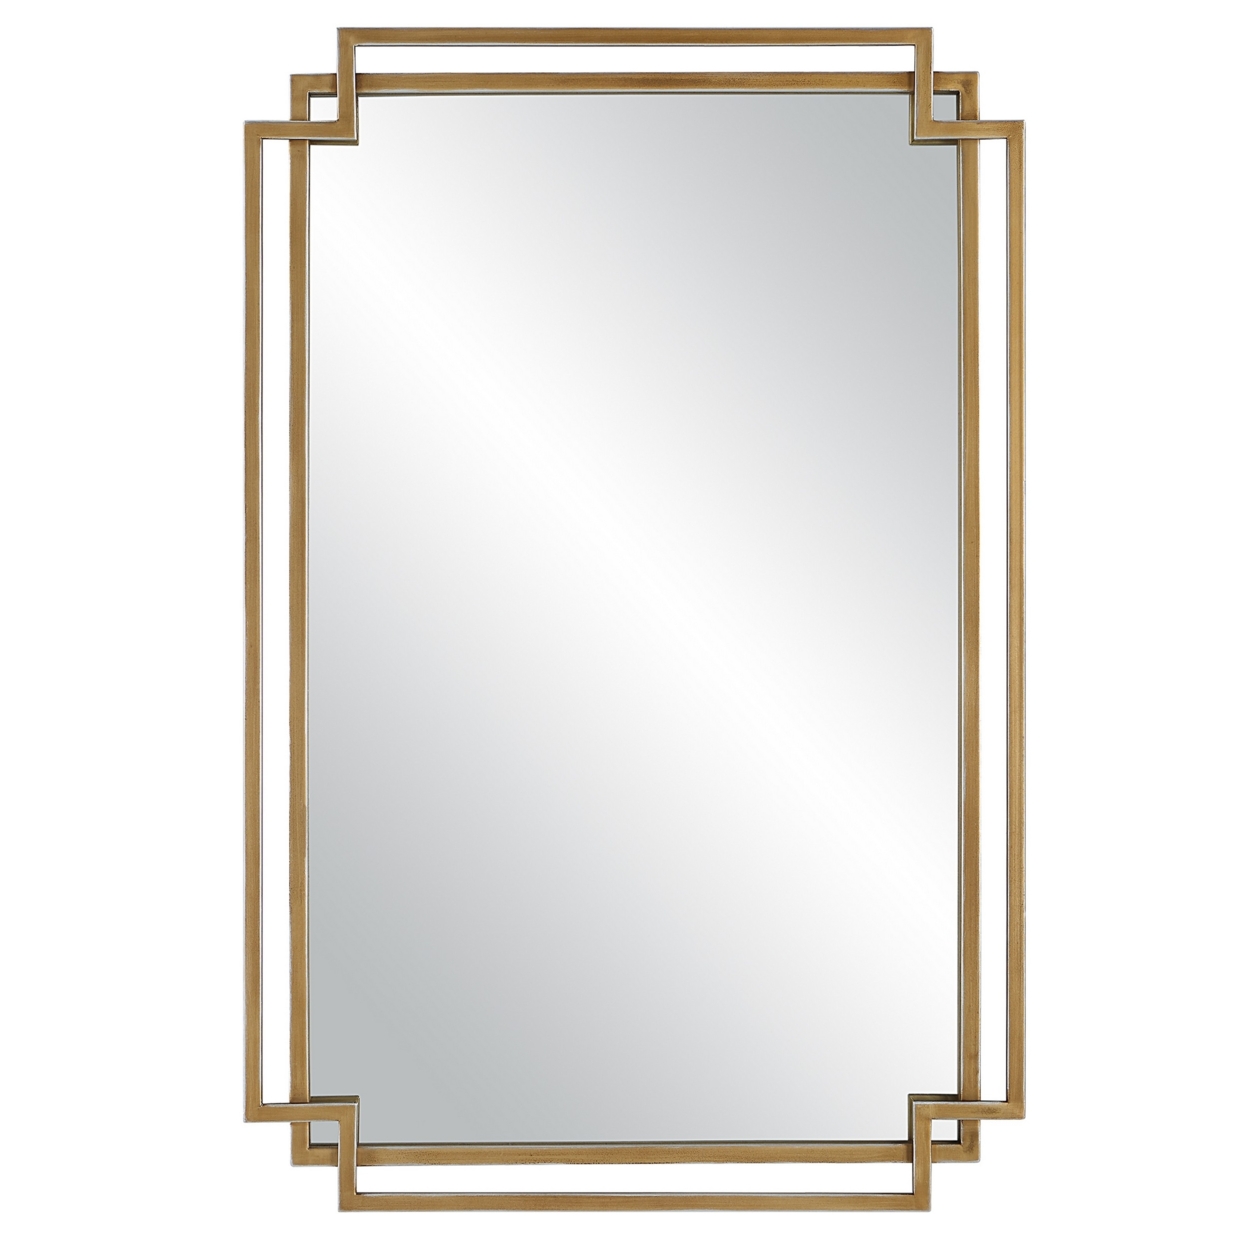 22 X 34 Rectangular Accent Mirror With Two Overlapping Frames, Brushed Gold- Saltoro Sherpi